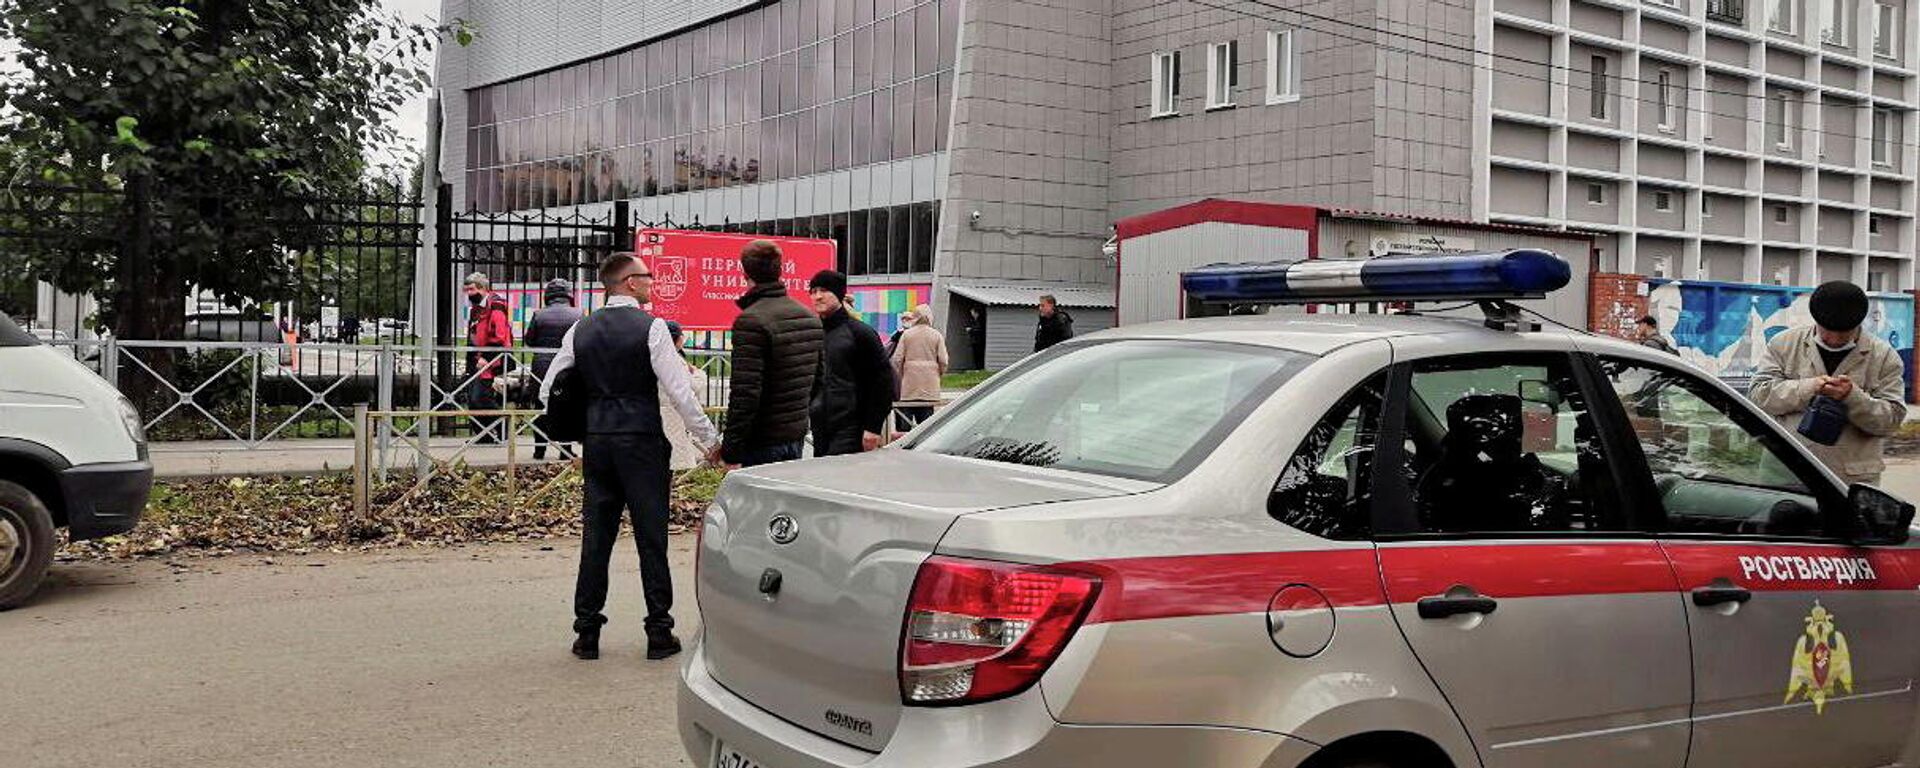 A car of Russia's National Guard is seen at the scene after a gunman opened fire at the Perm State University in Perm, Russia September 20, 2021 - Sputnik International, 1920, 20.09.2021